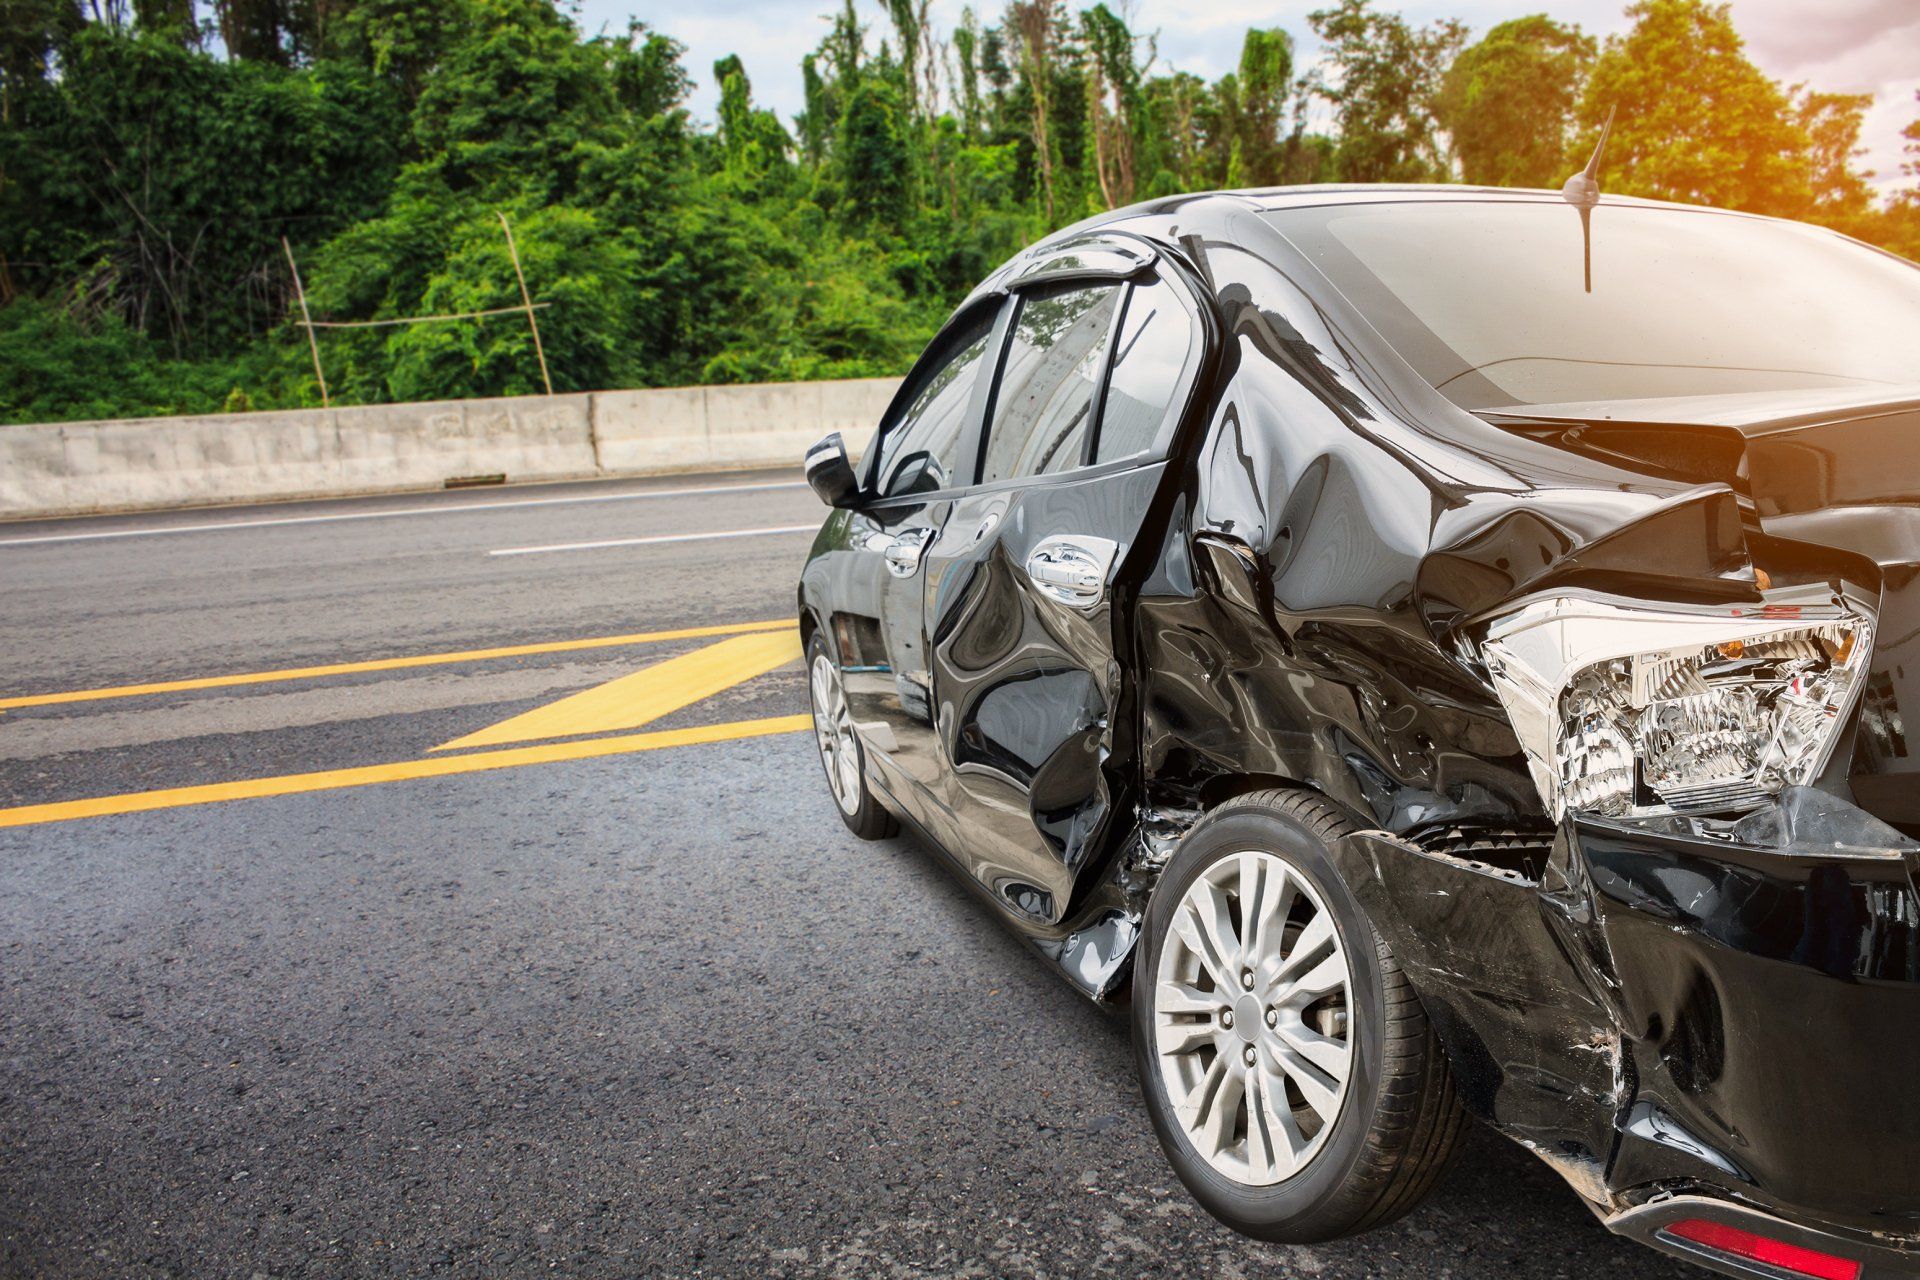 rear end collisions are usually caused by